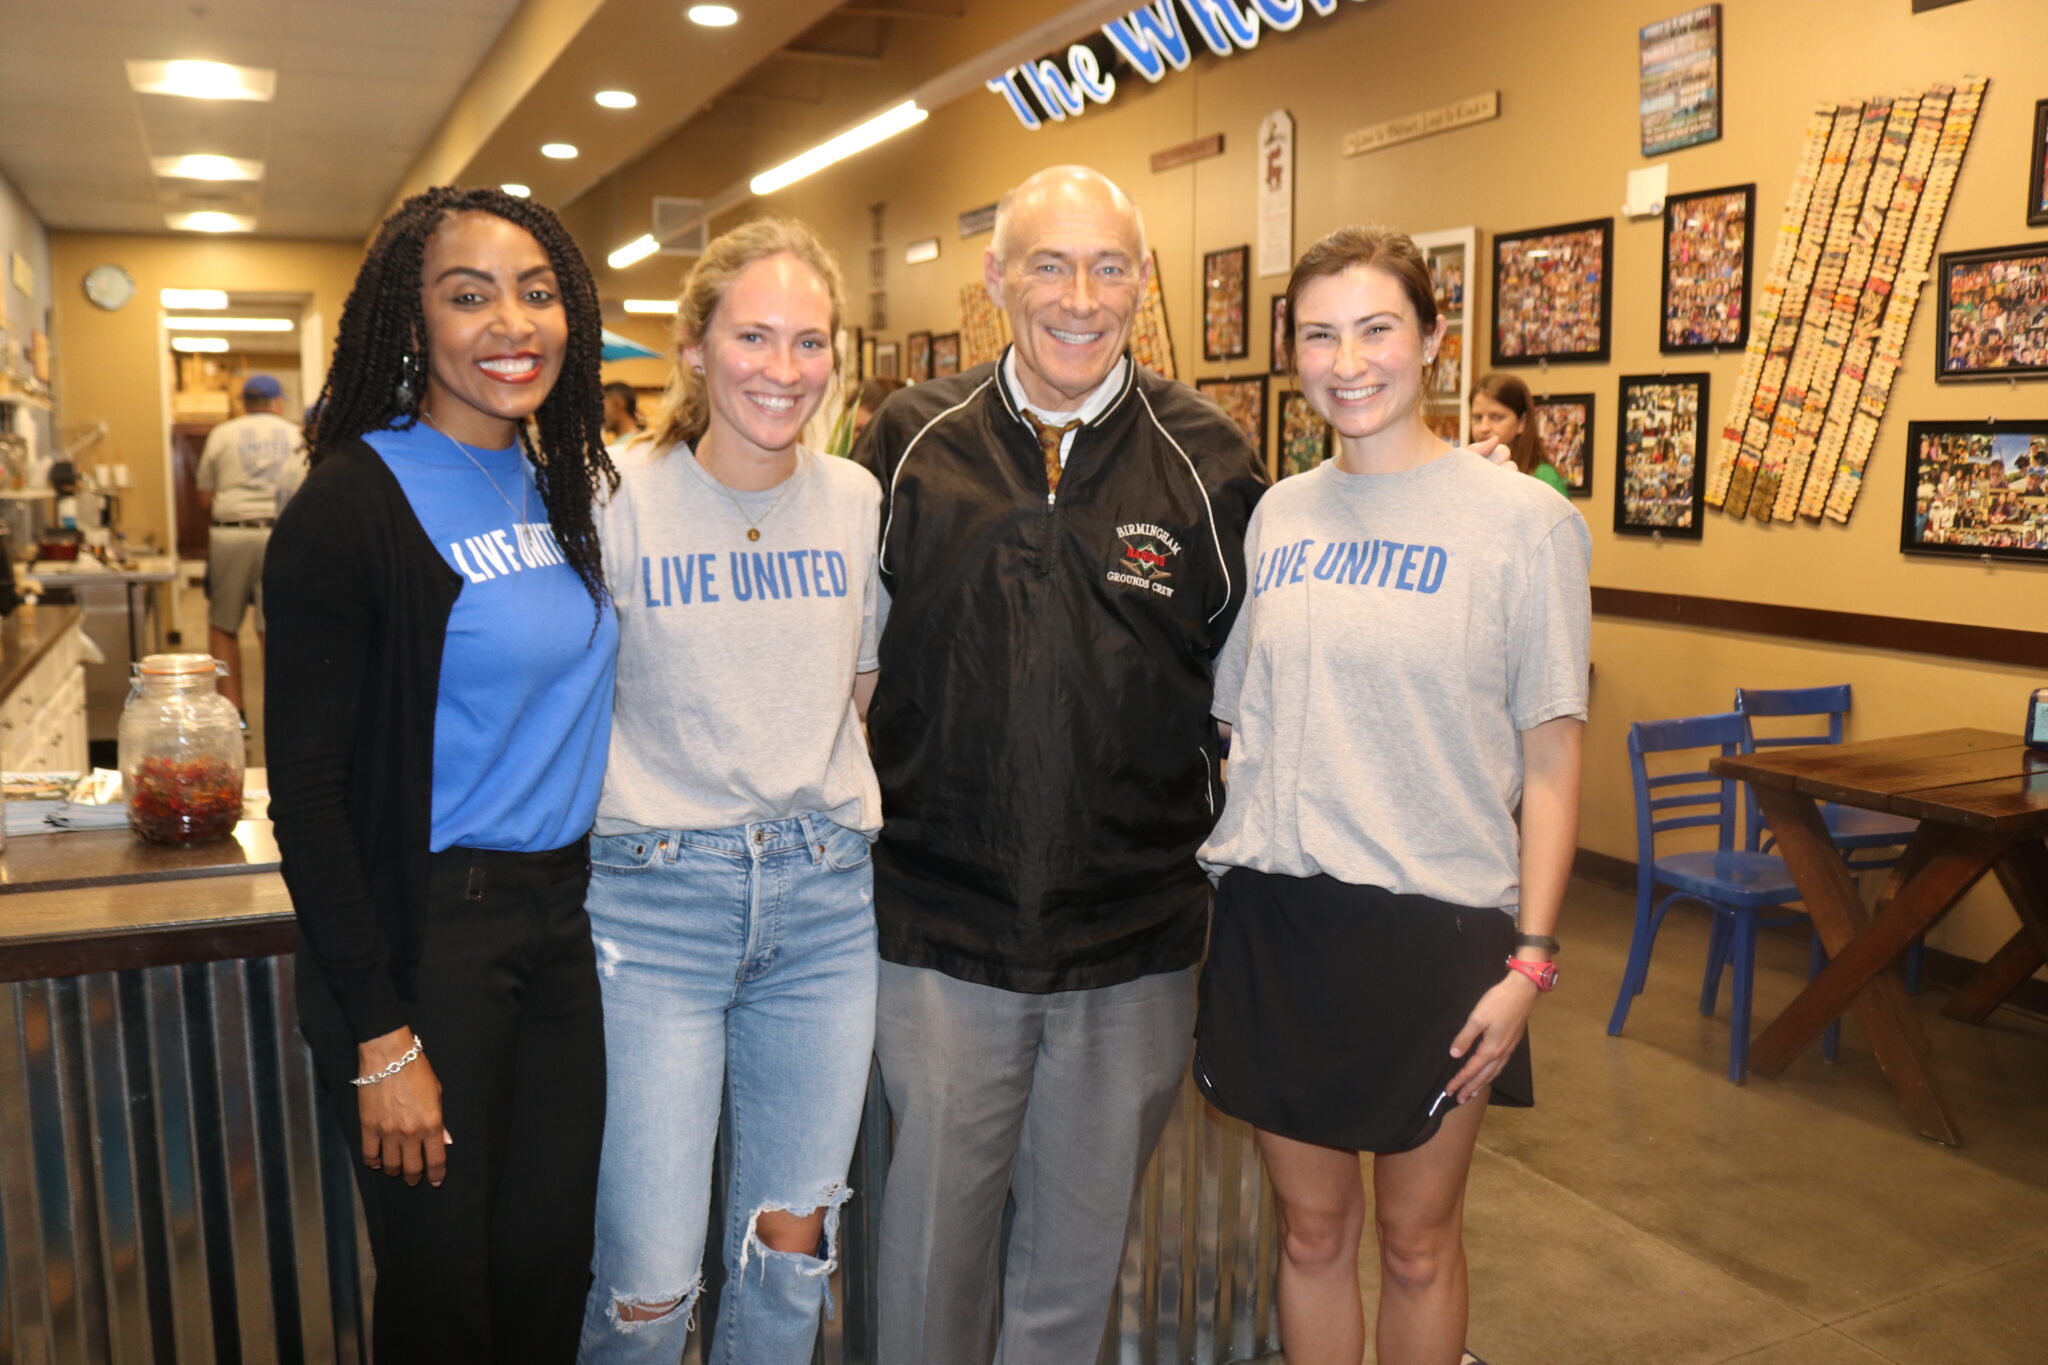 IMG 3090 James Spann and Hoover's Mayor joined United Way as celebrity ice cream scoopers—details here